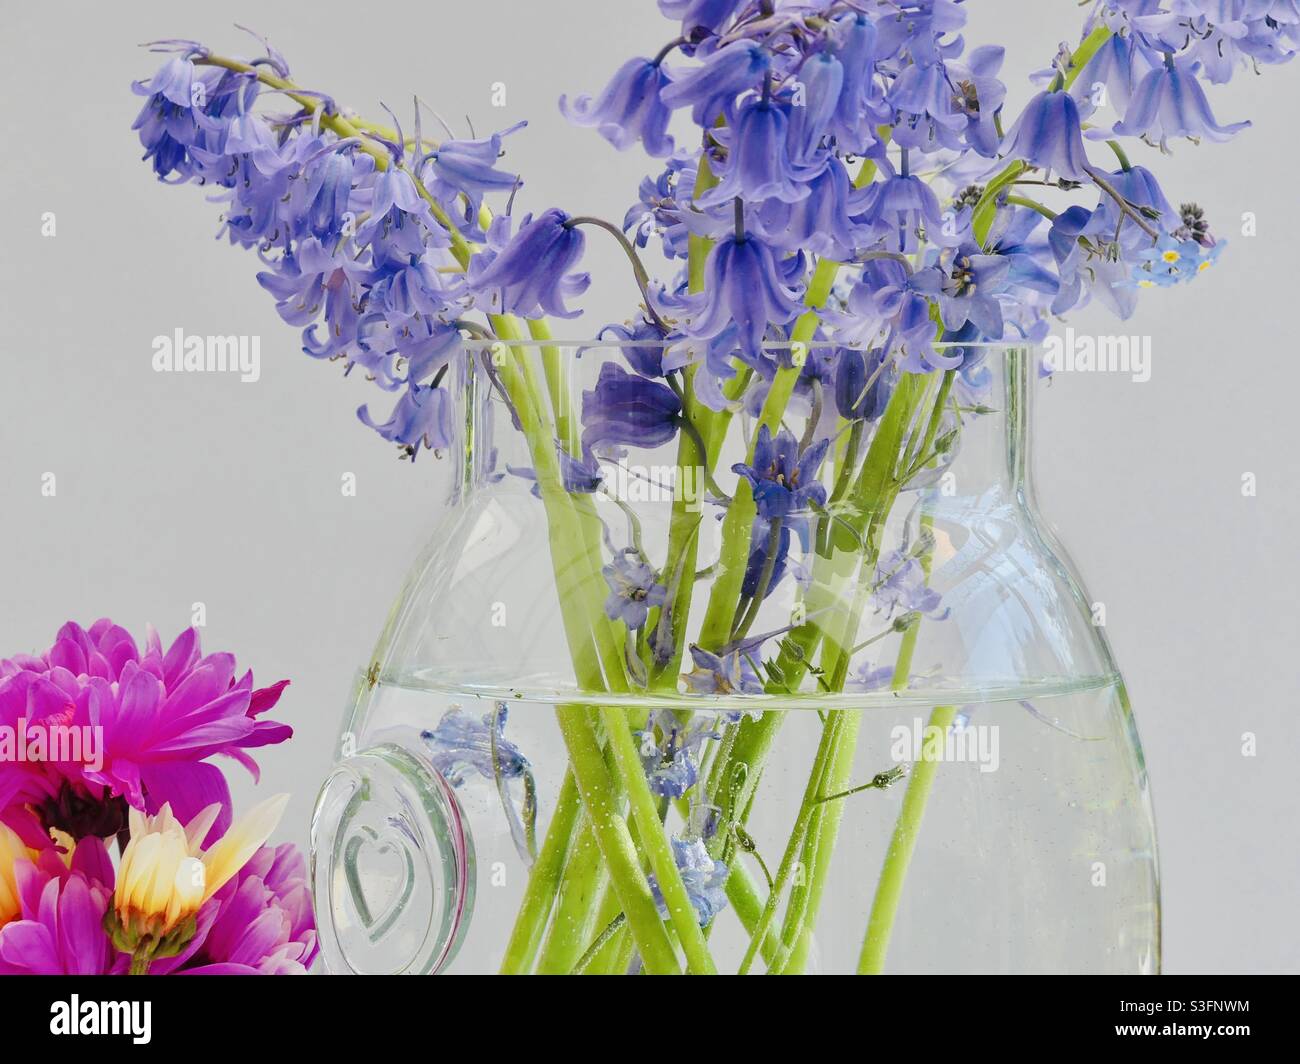 Bluebells in a vase Stock Photo